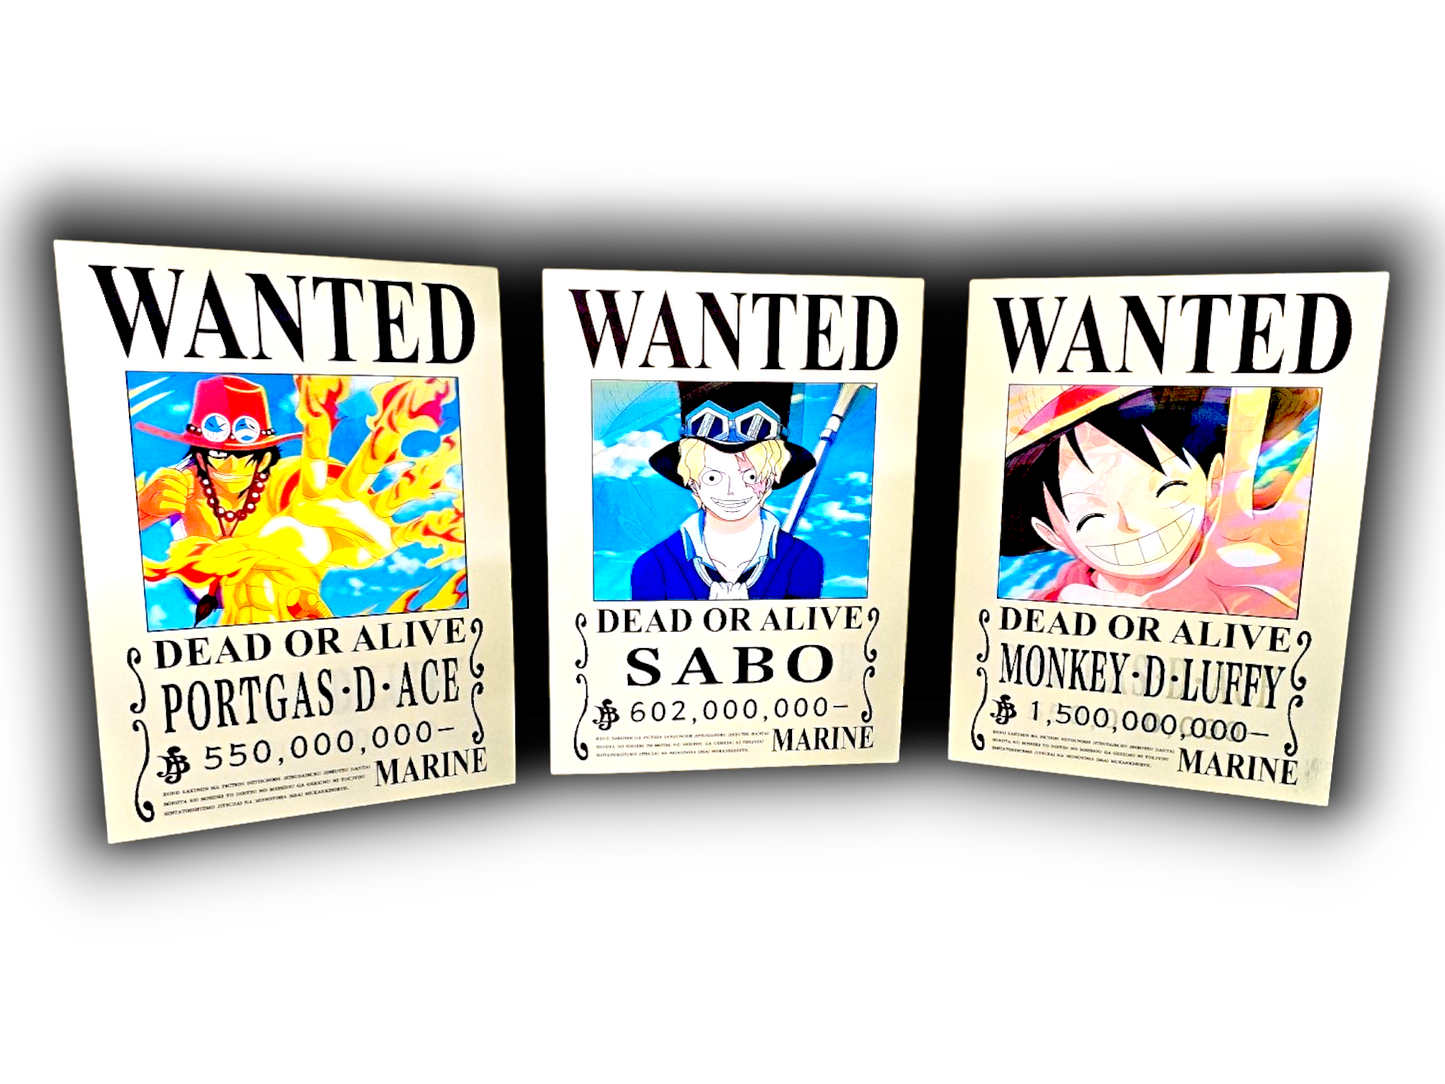 ONEPIECE 3D MOTION WALL POSTERS